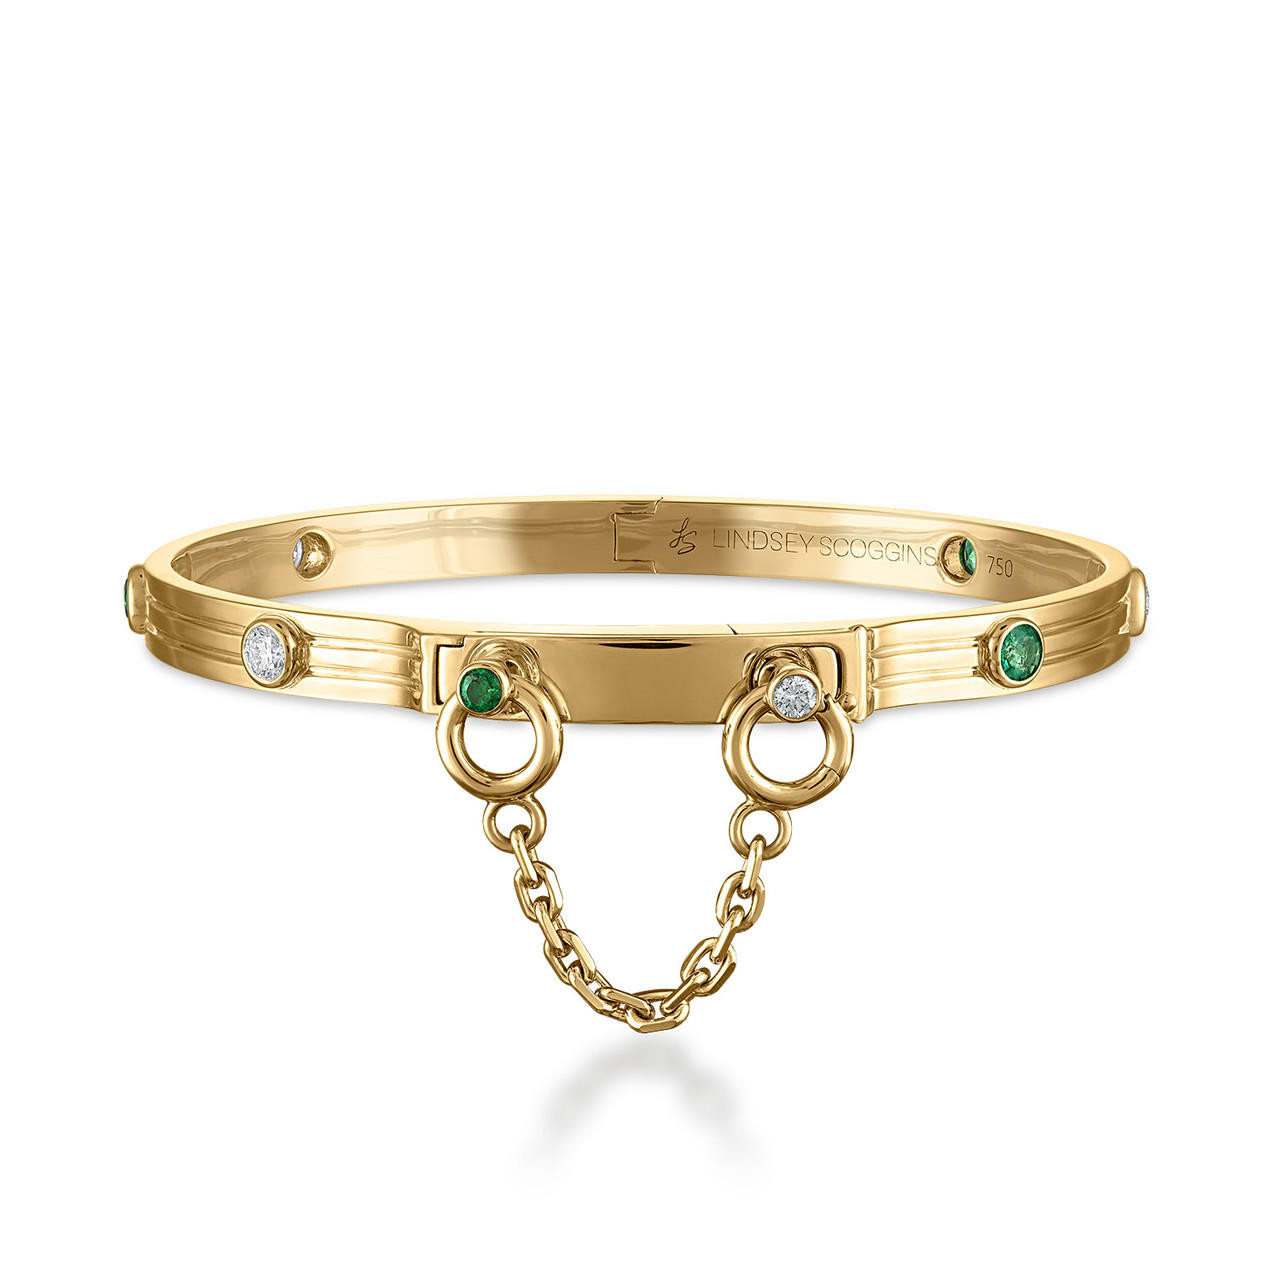 Oath single cuff with emerald and diamond bezels in 18k yellow gold